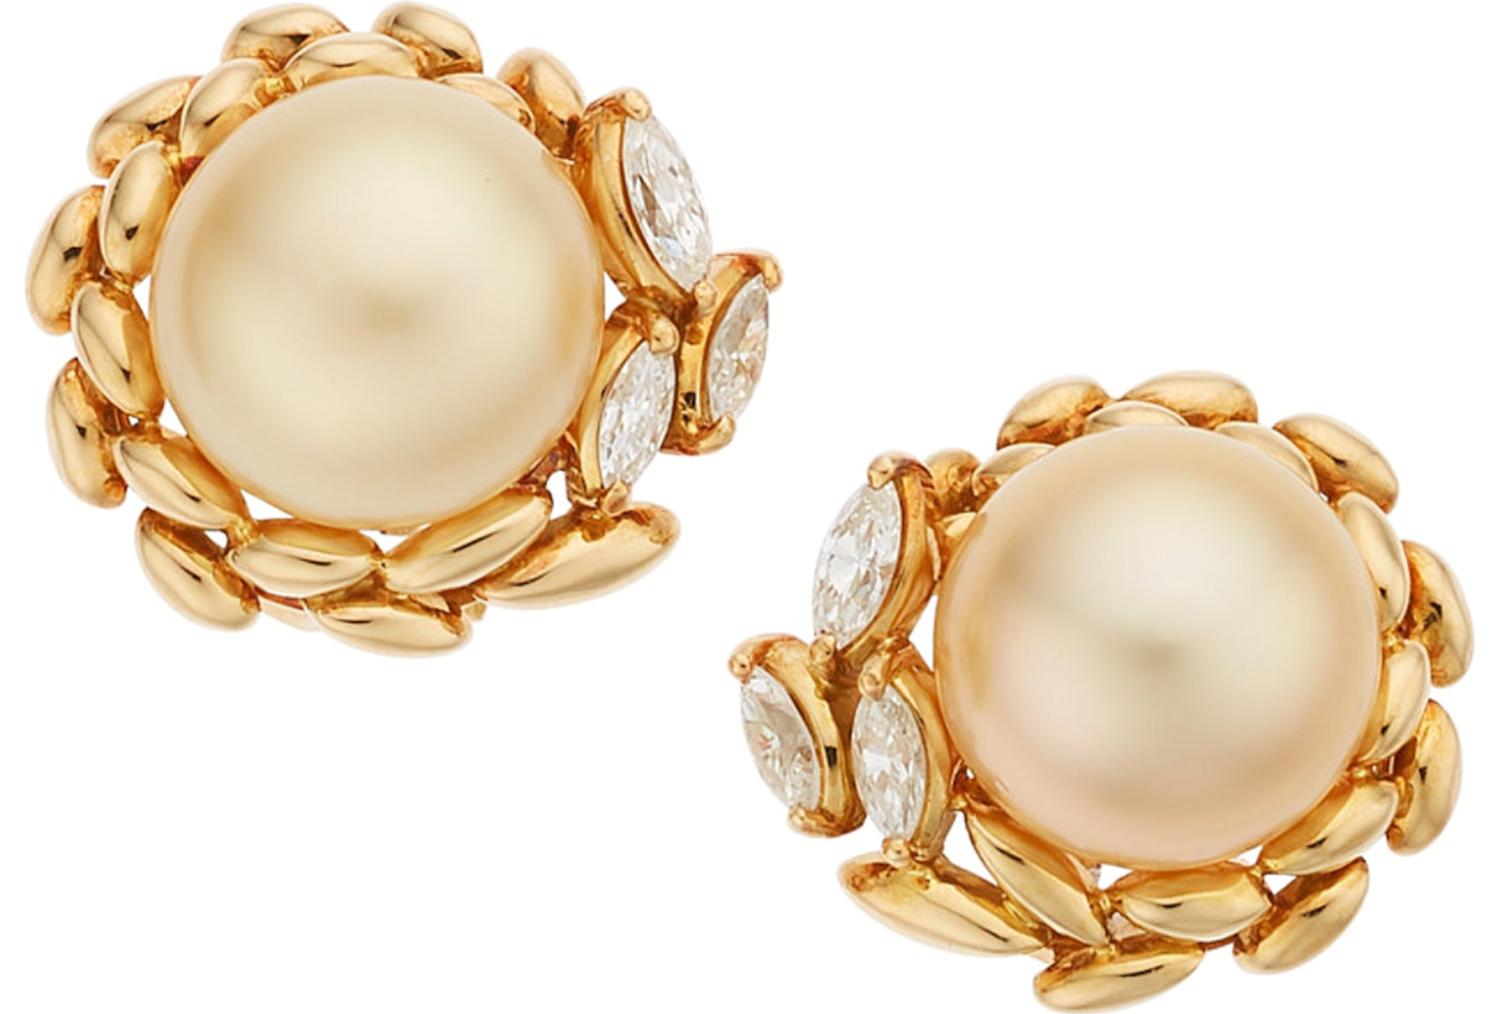 Glamorous and effortlessly stylish is how you would describe these pearl ear clips. The focal point is two beautiful golden South Sea Pearls measuring 11.6mm and 11.7mm enhanced with approximately 0.50cts of bright, white marquise cut diamonds,